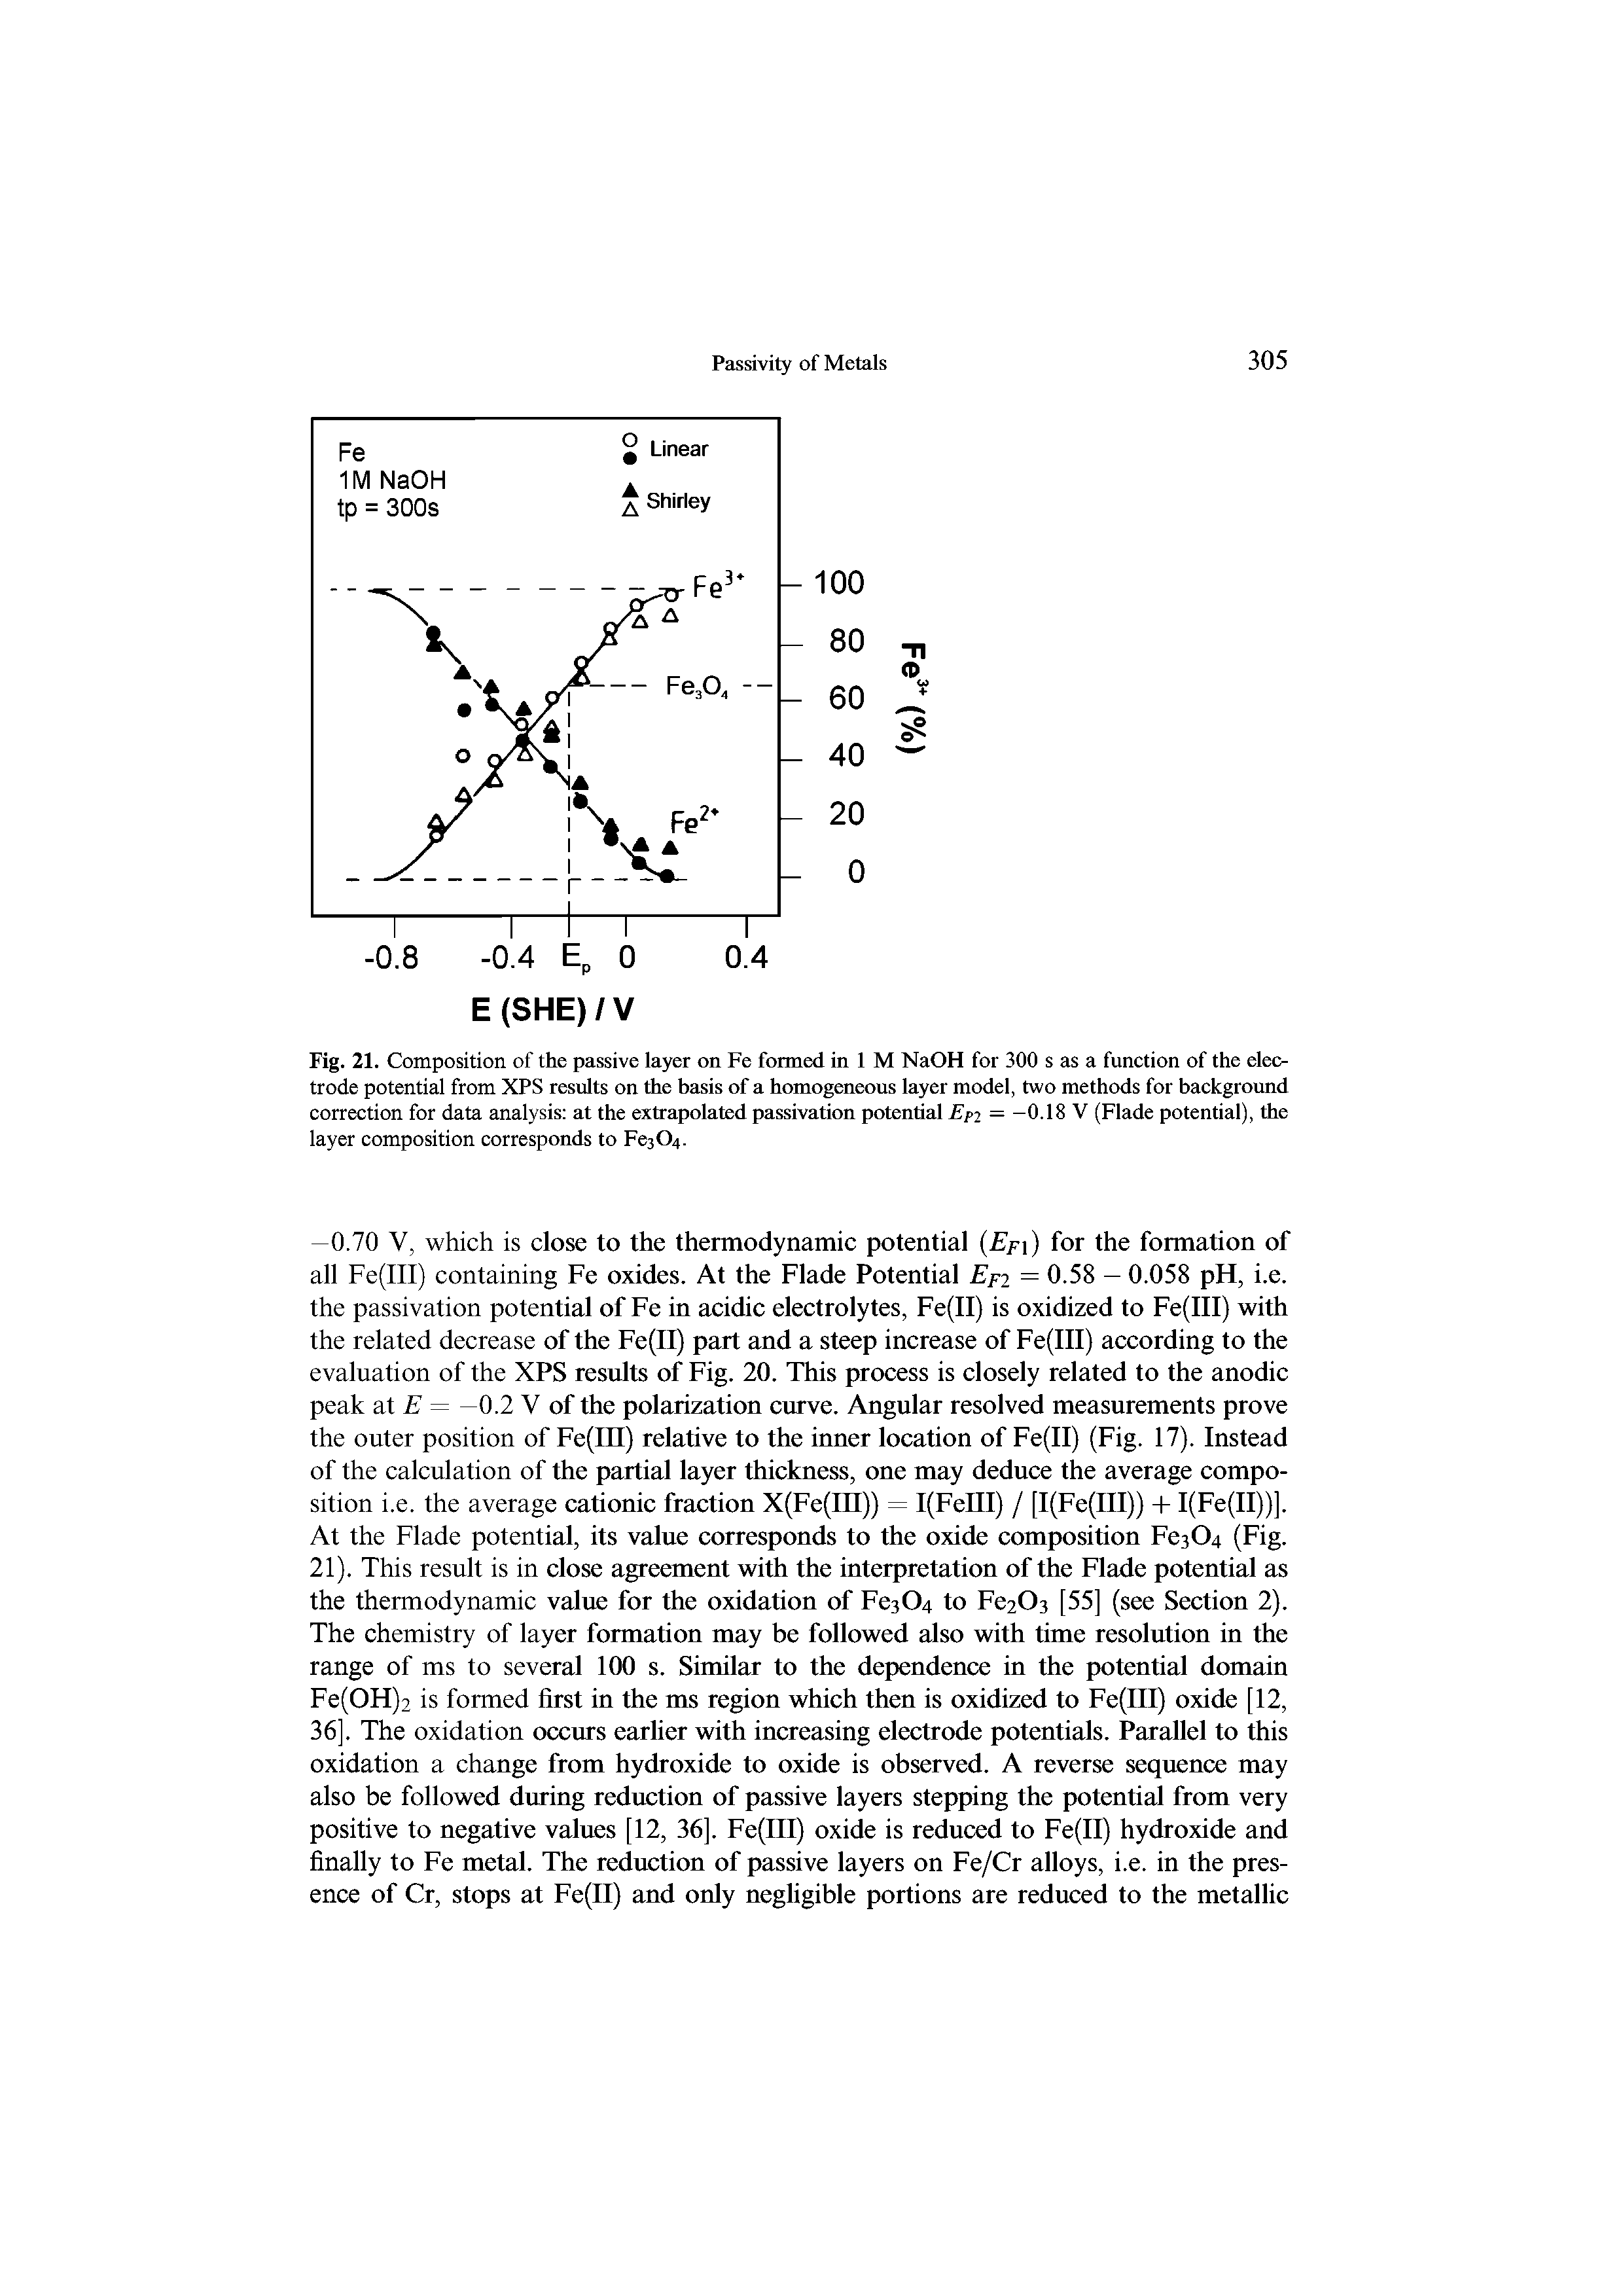 Fig. 21. Composition of the passive layer on Fe formed in 1 M NaOH for 300 s as a function of the electrode potential from XPS results on the basis of a homogeneous layer model, two methods for background correction for data analysis at the extrapolated passivation potential Efj = -0.18 V (Flade potential), the layer composition corresponds to Fe304.